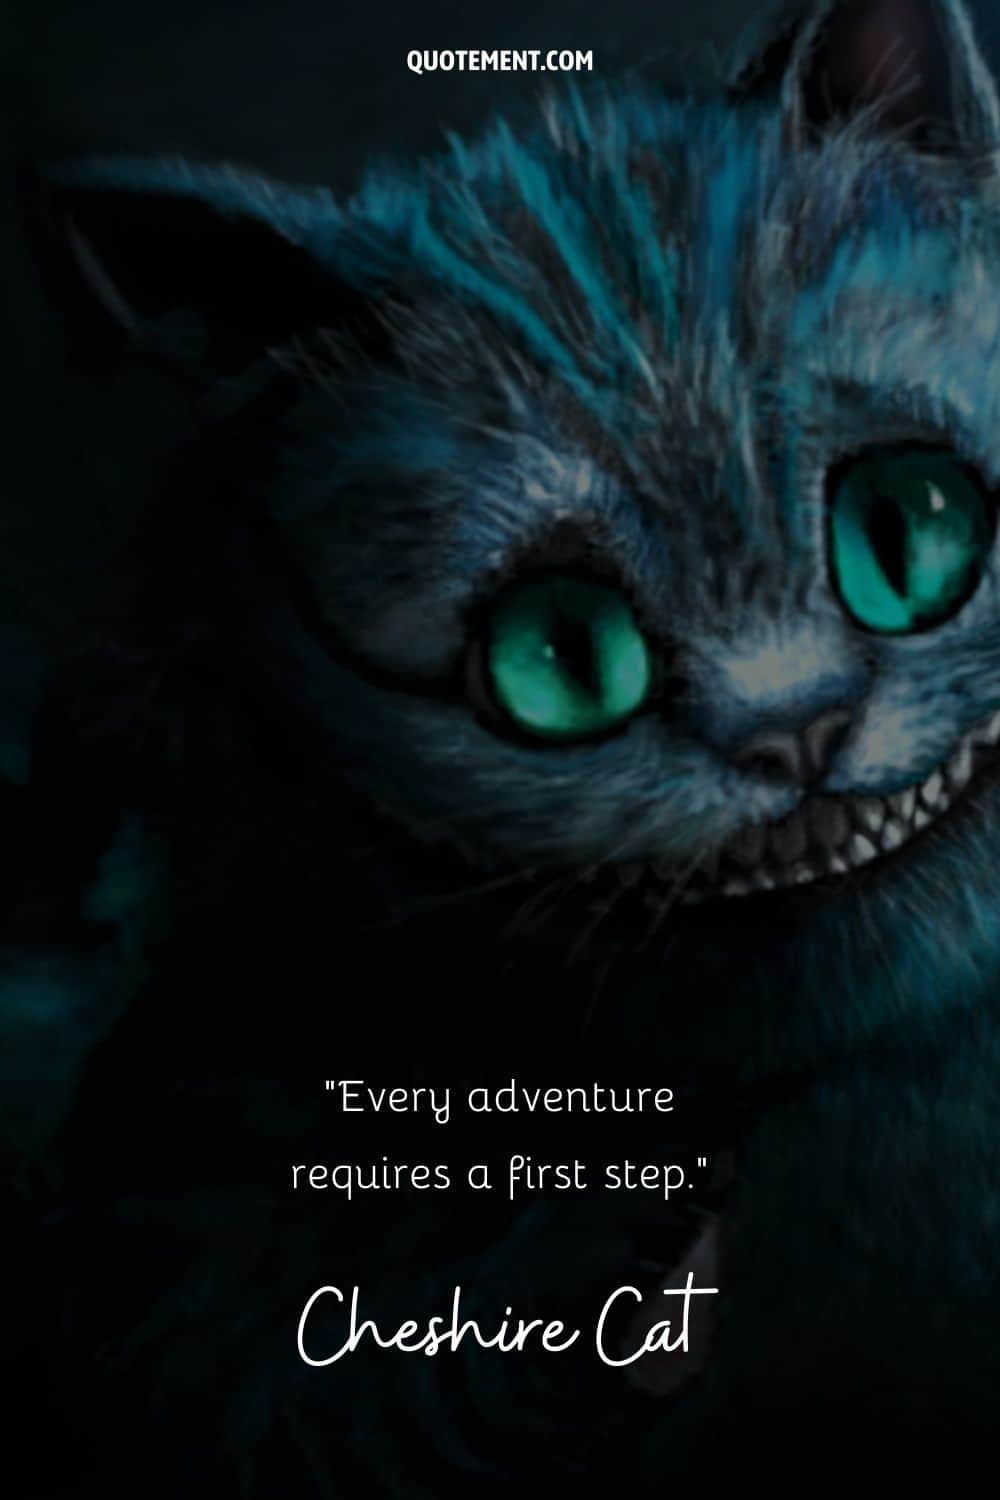 Inspirational and motivational quote by the Cheshire Cat, and its image in the background